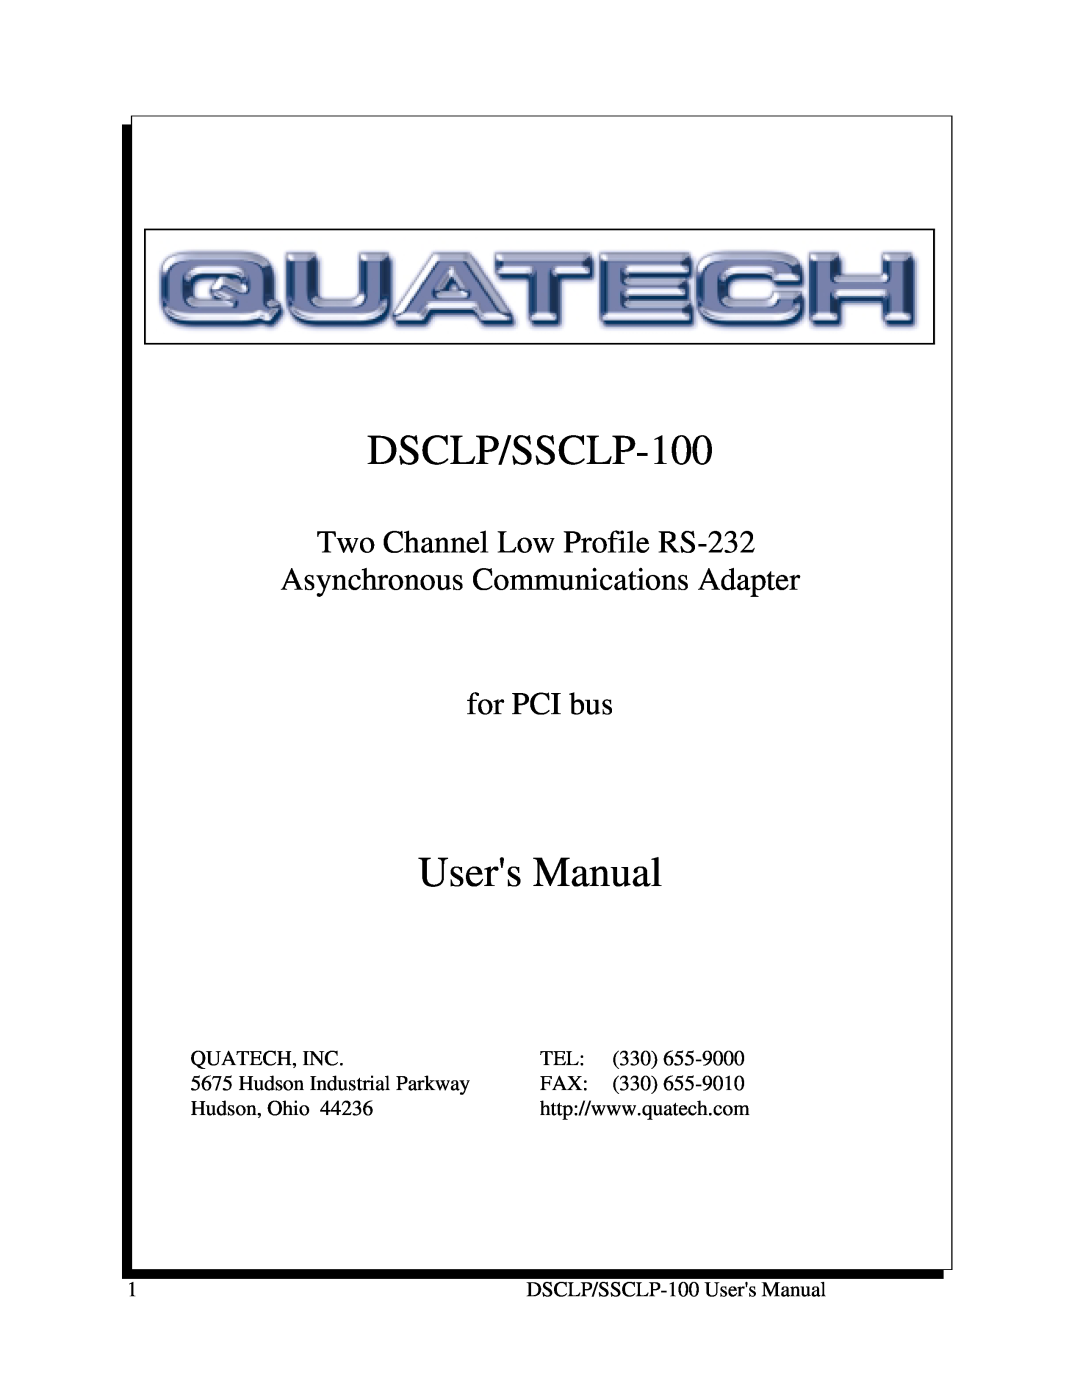 Quatech DSCLP/SSCLP-100 user manual Users Manual, Two Channel Low Profile RS-232 Asynchronous Communications Adapter 